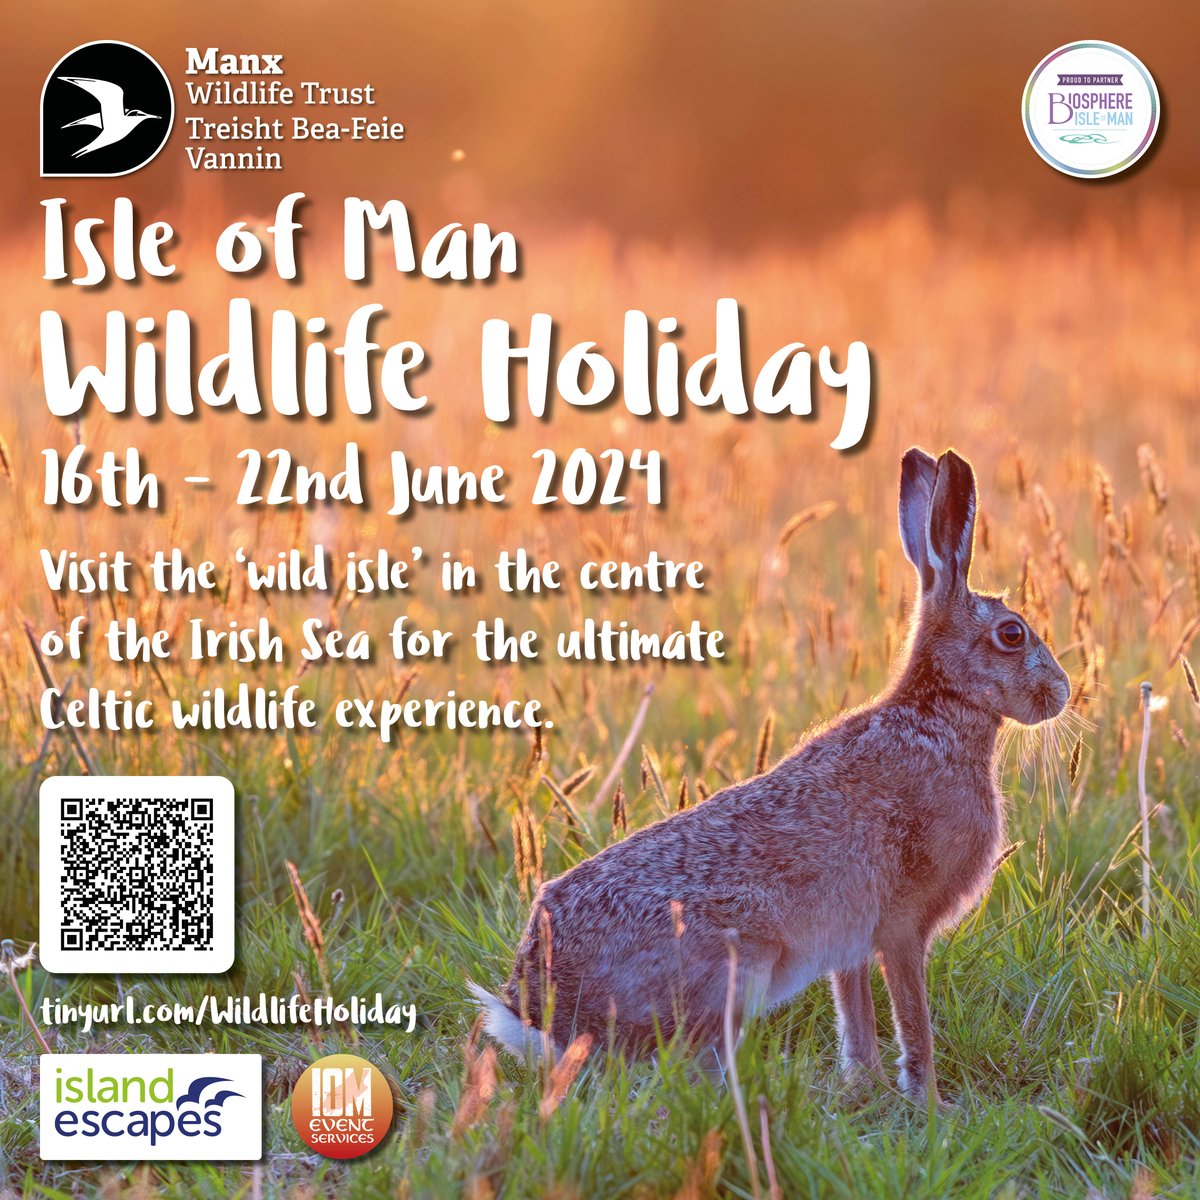 Are you looking for an incredible wildlife experience this summer? Our friends @manxnature are offering an exclusive wildlife experience week this June around the Isle of Man. 💚 Find out more here!👇 ow.ly/3bo450RnNHj #WildlifeHoliday